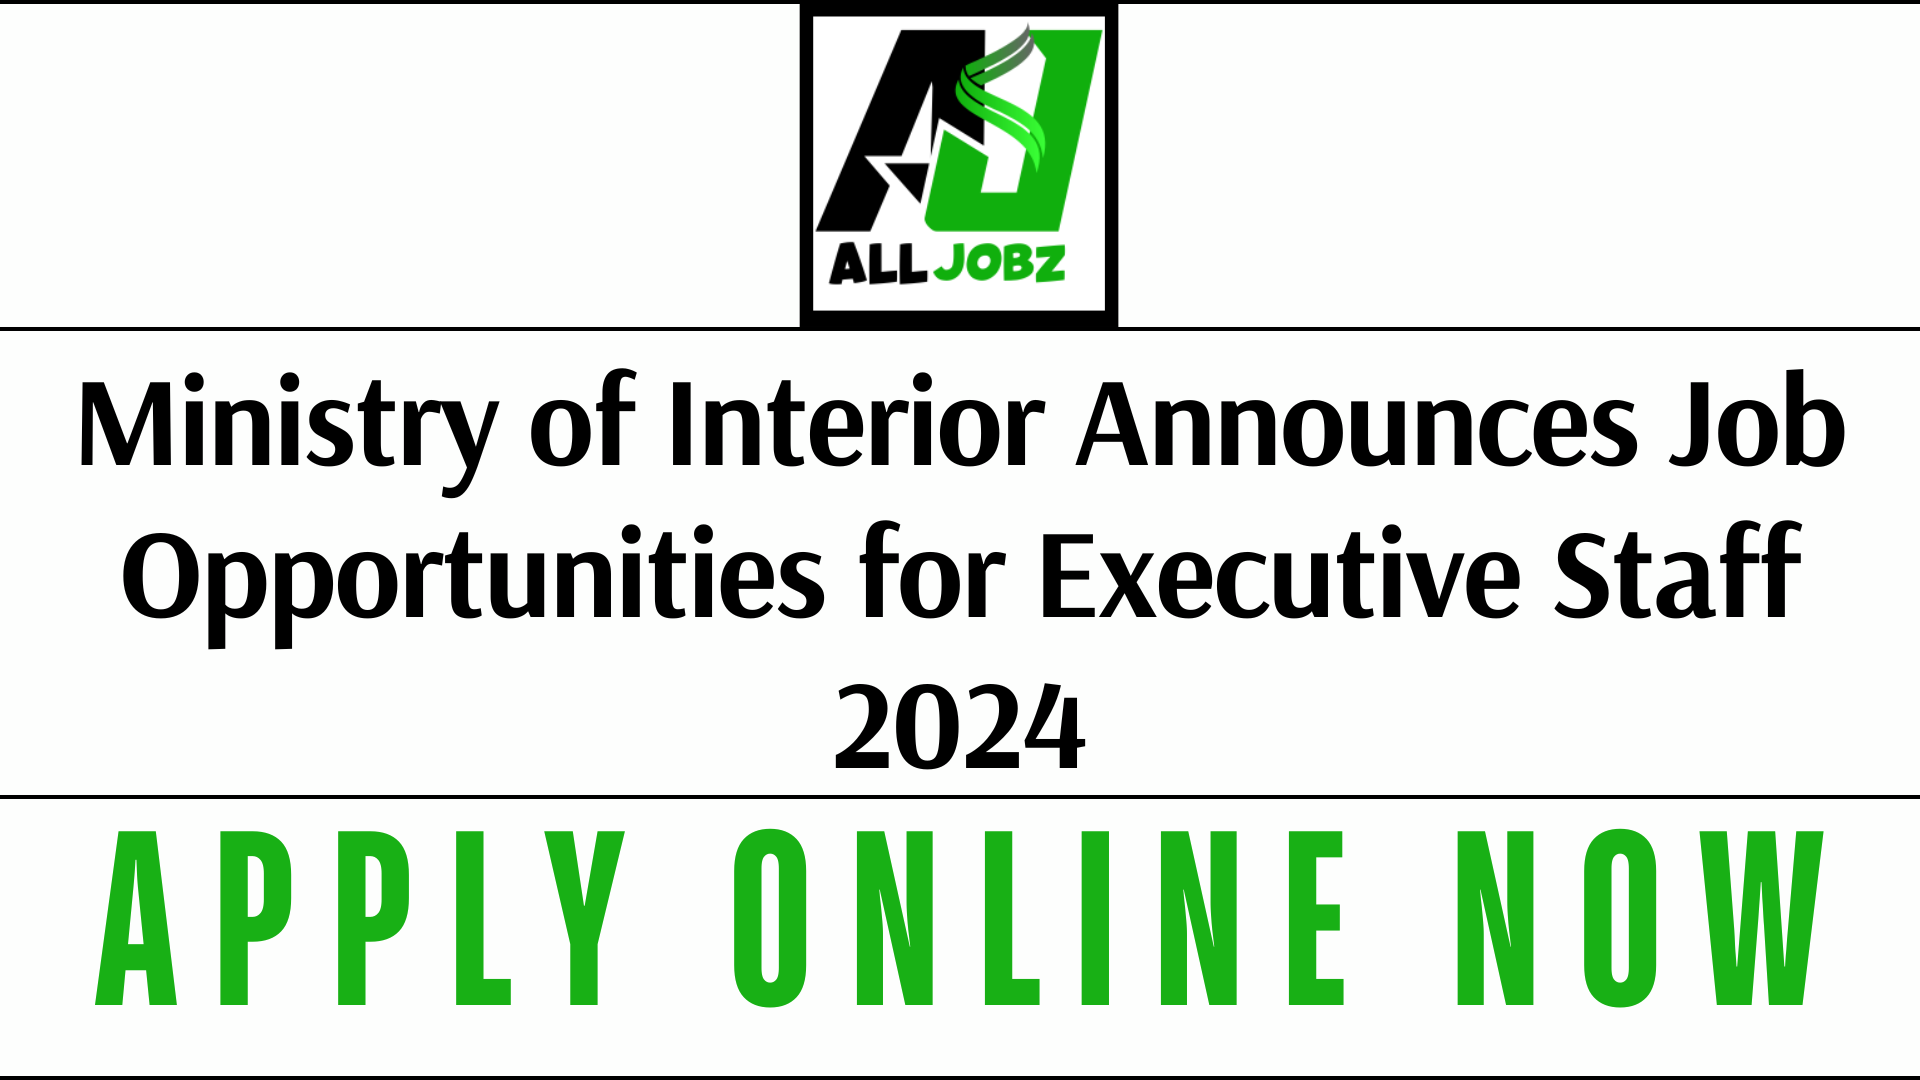 Ministry Of Interior Announces Job Opportunities For Executive Staff 2024, Www.interior.gov.pk Jobs 2024, Ministry Of Interior Jobs 2024, Ministry Of Interior Announces Job Opportunities For Executive Staff 2024 Islamabad, Ministry Of Interior Jobs 2024 Online Apply, Ministry Of Interior Jobs Apply Online, Ministry Of Interior Jobs 2024, Ministry Of Interior Announces Jobs 2024 Sindh, Ministry Of Interior Announces Jobs 2024 Pakistan, Ministry Of Interior Announces Jobs 2024 Online Apply, Ministry Of Interior Jobs 2024 Online Apply, Ministry Of Interior Announces Jobs 2024 Last Date, Ministry Of Interior Announces Jobs 2024 Karachi,